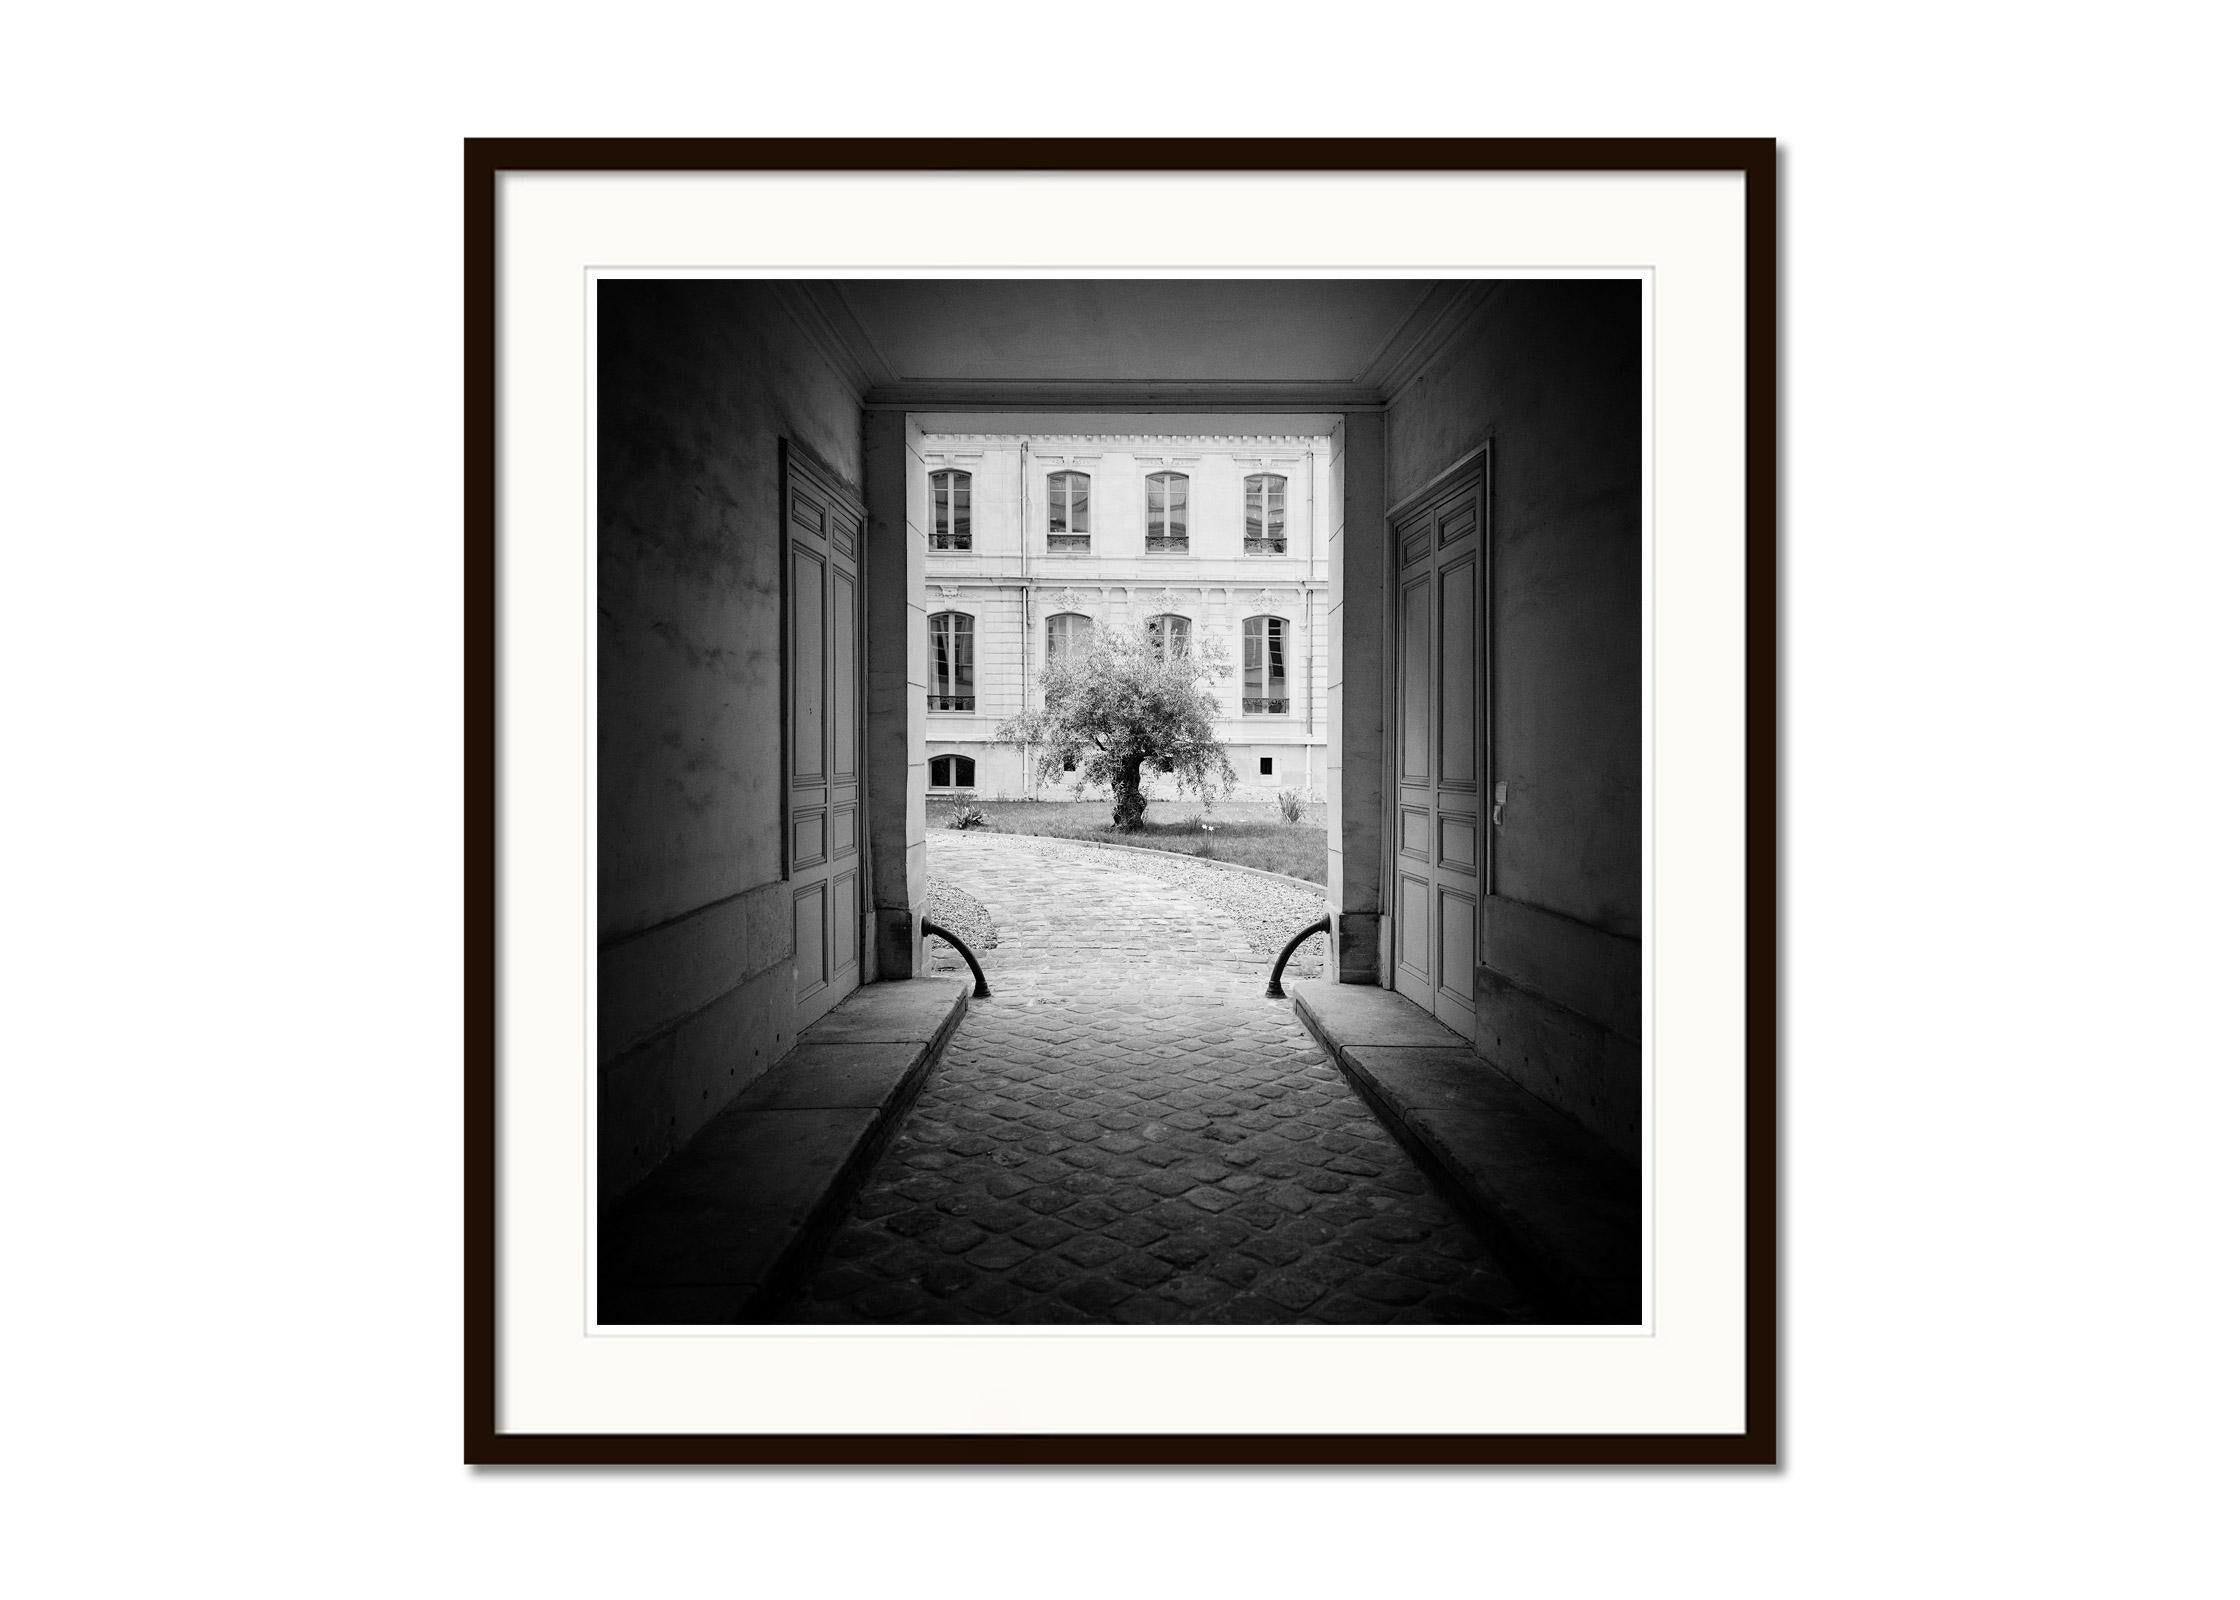 Tree in the Courtyard Paris black white fine art cityscape photography print - Black Black and White Photograph by Gerald Berghammer, Ina Forstinger